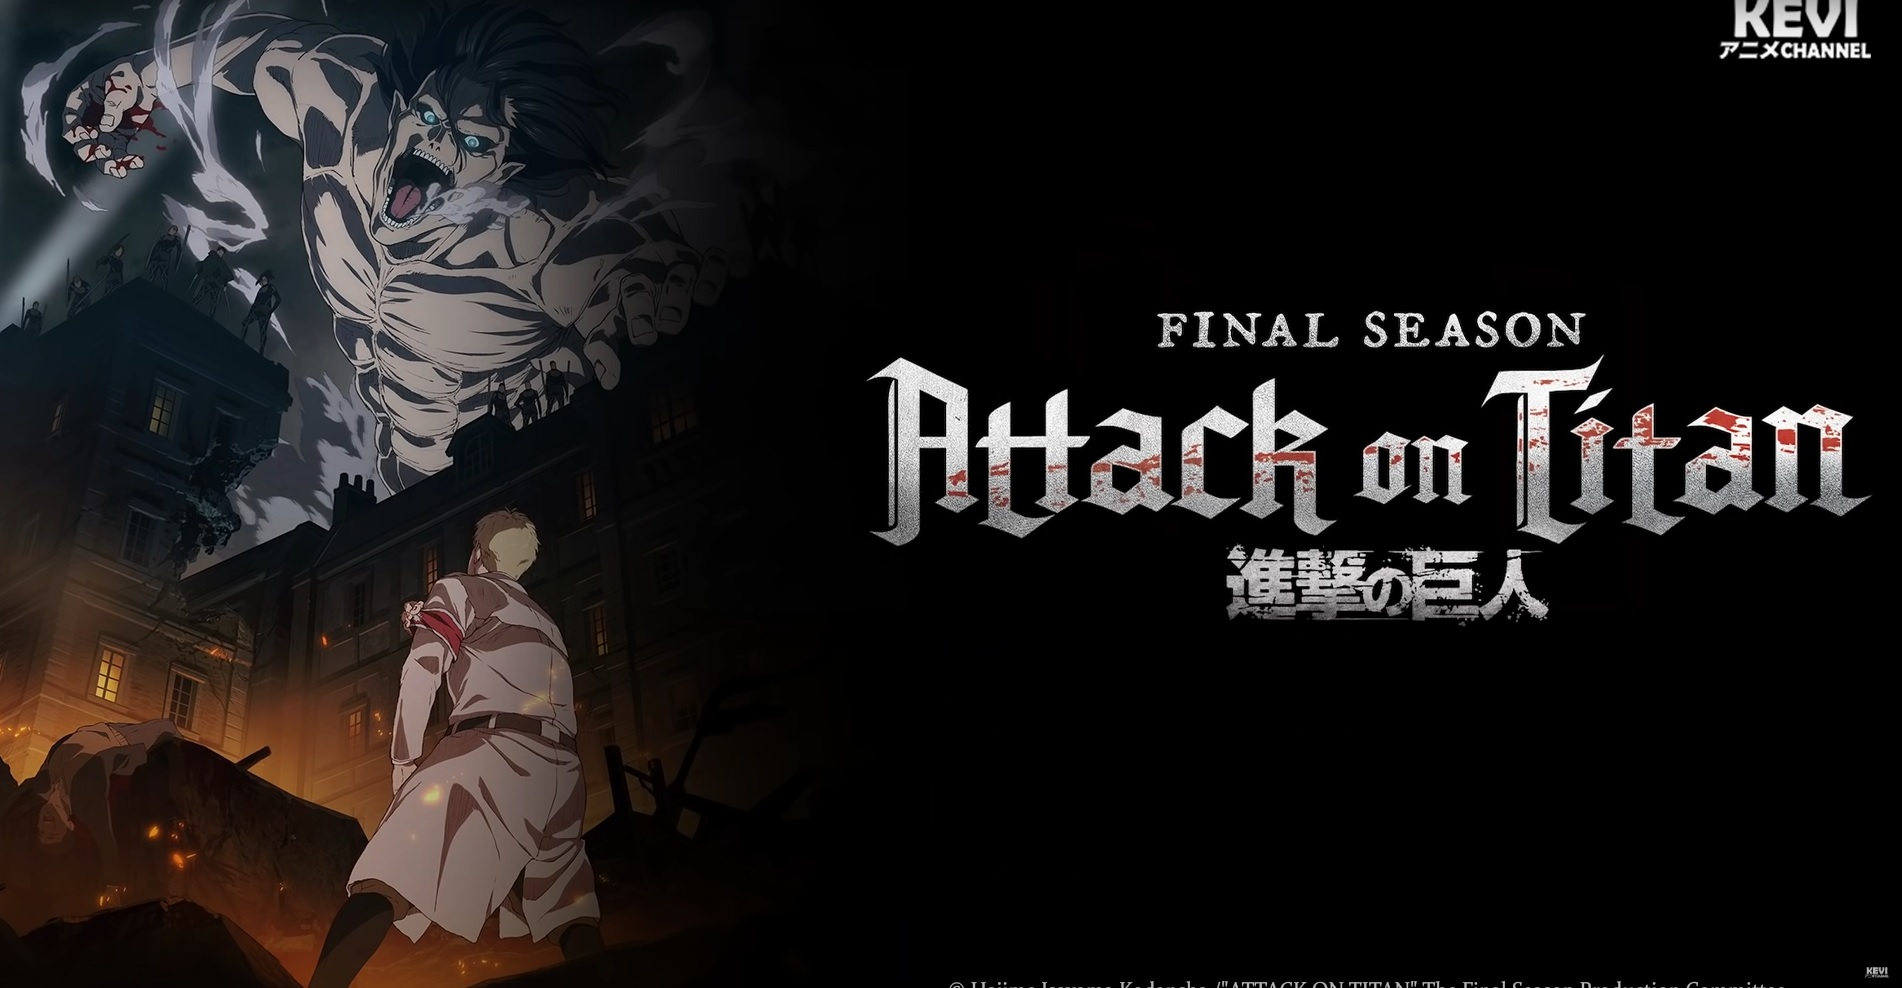 Attack on Titan' Final Season Part 3 Confirms Release Date and Trailer